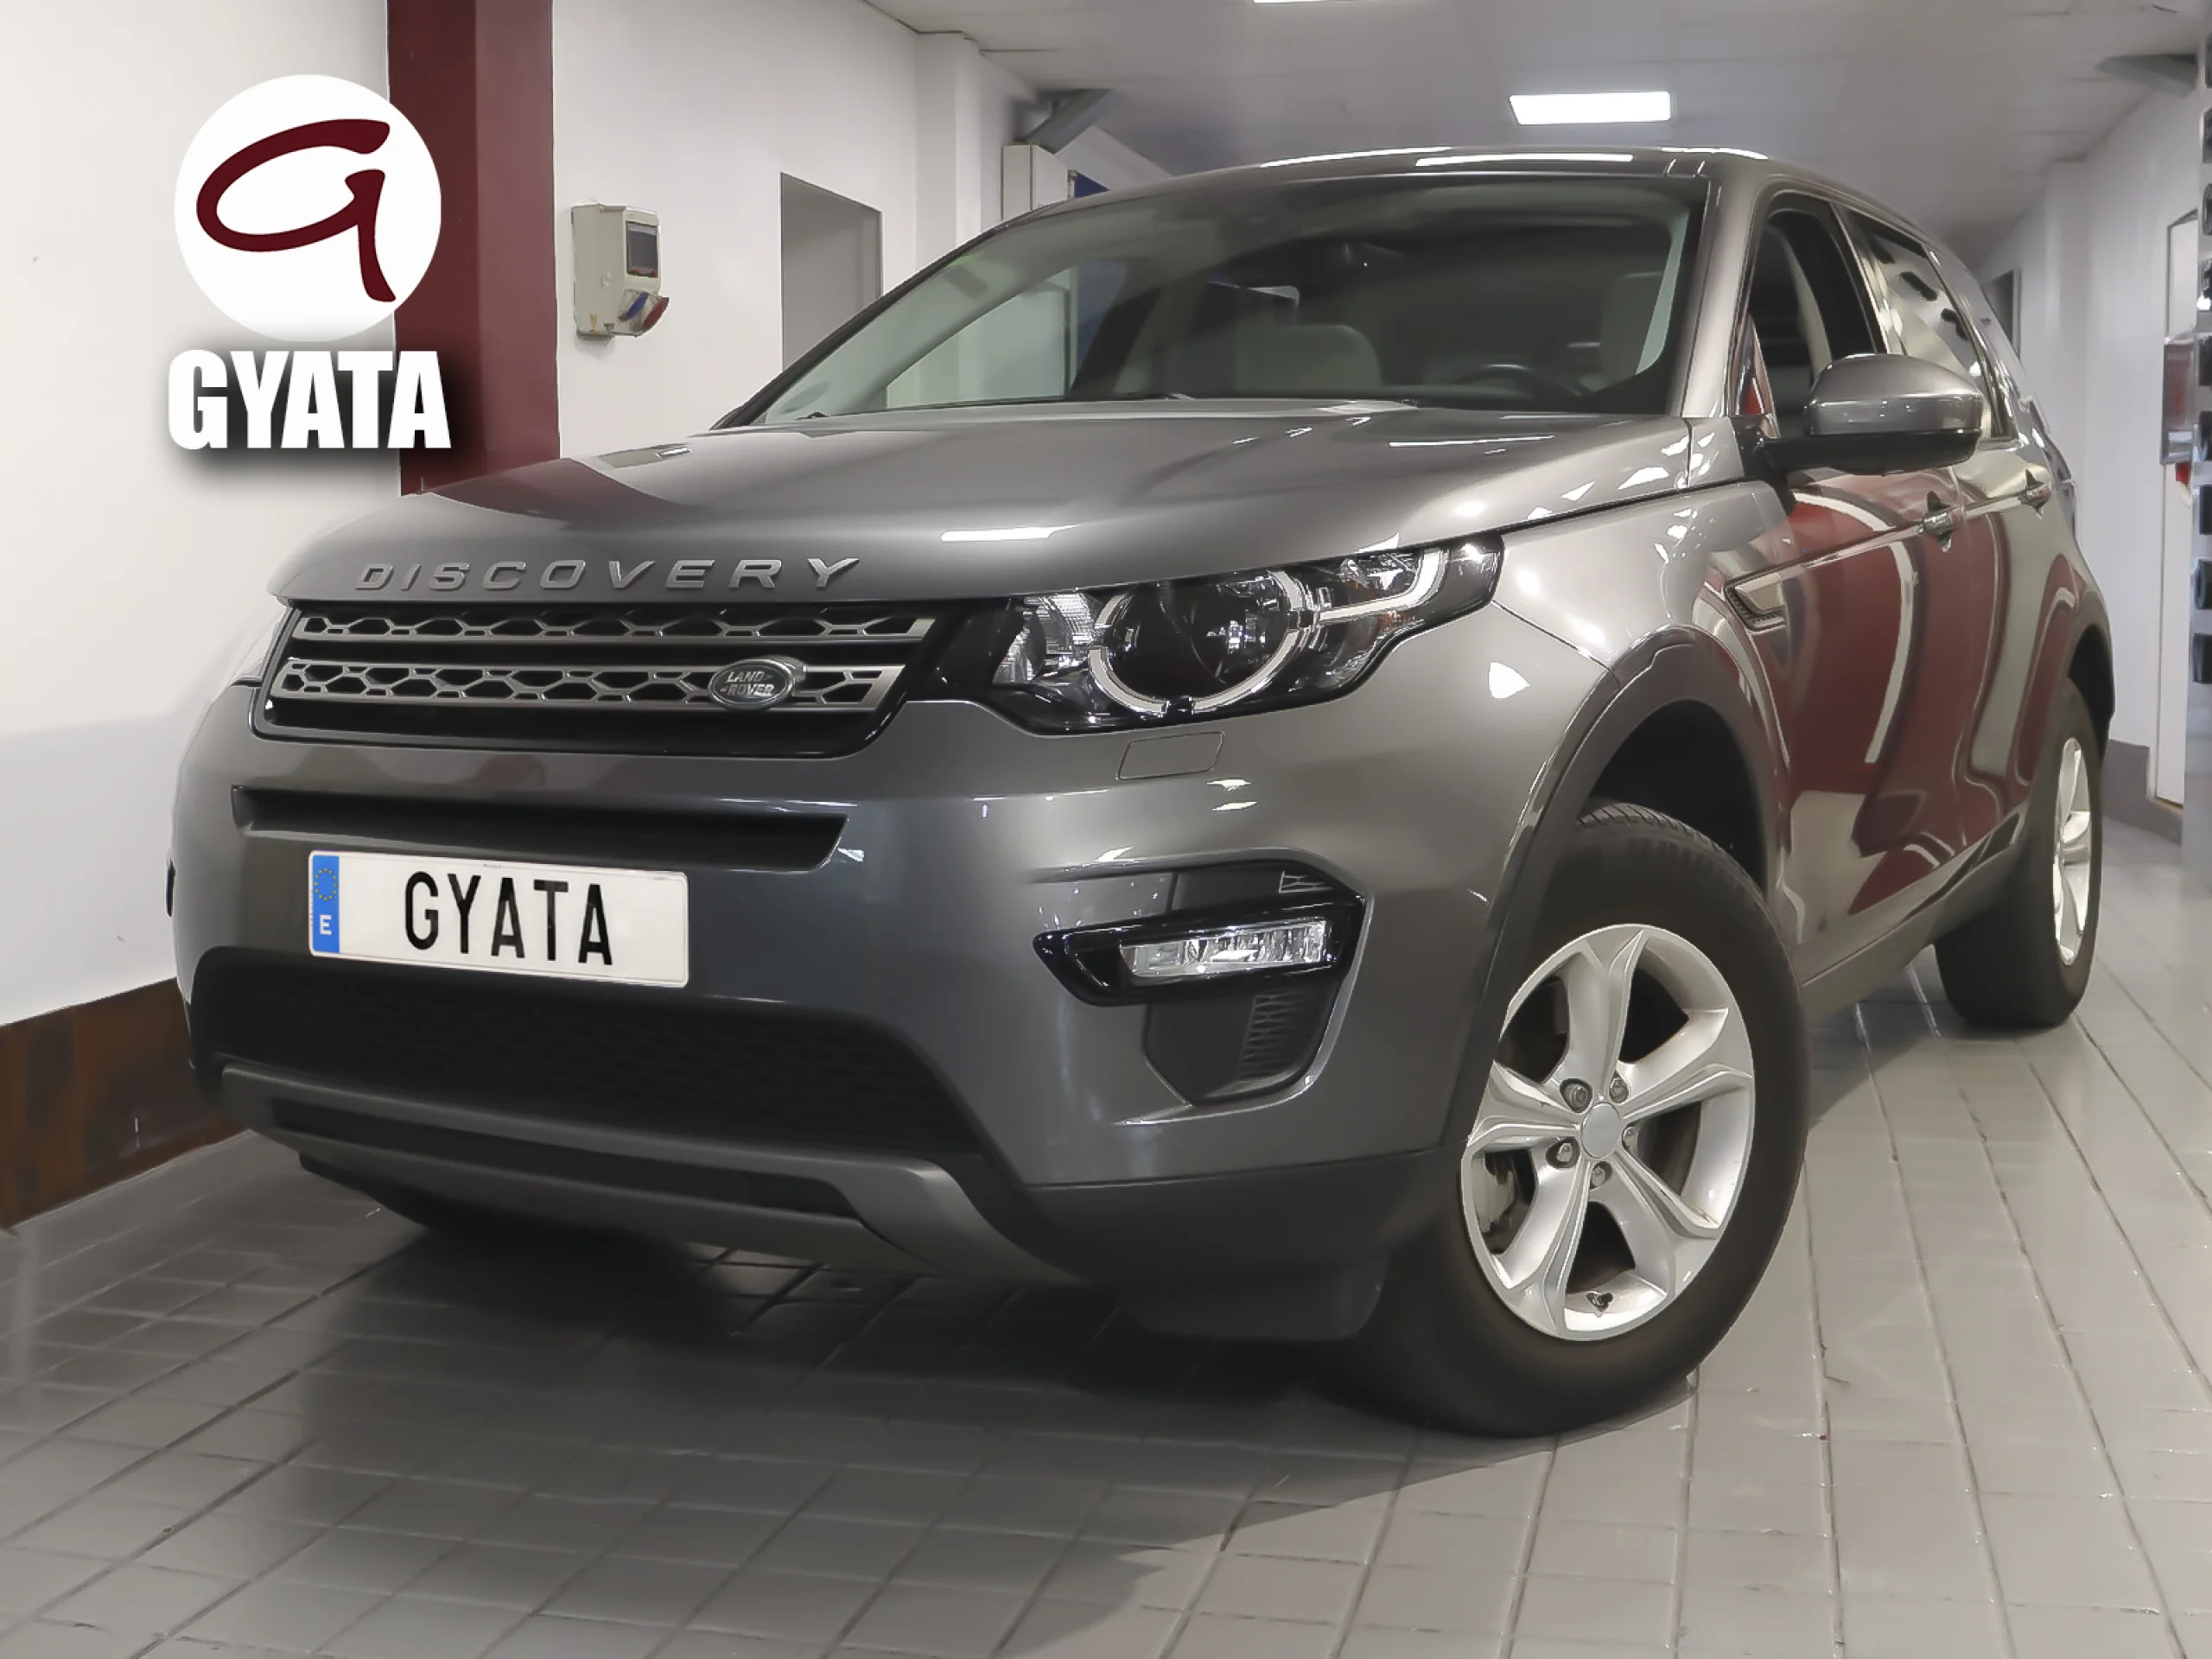 Land Rover Discovery Sport 2.2 TD4 SE 4WD Auto 7 Plzs. 110 kW (150 CV) - Foto 1